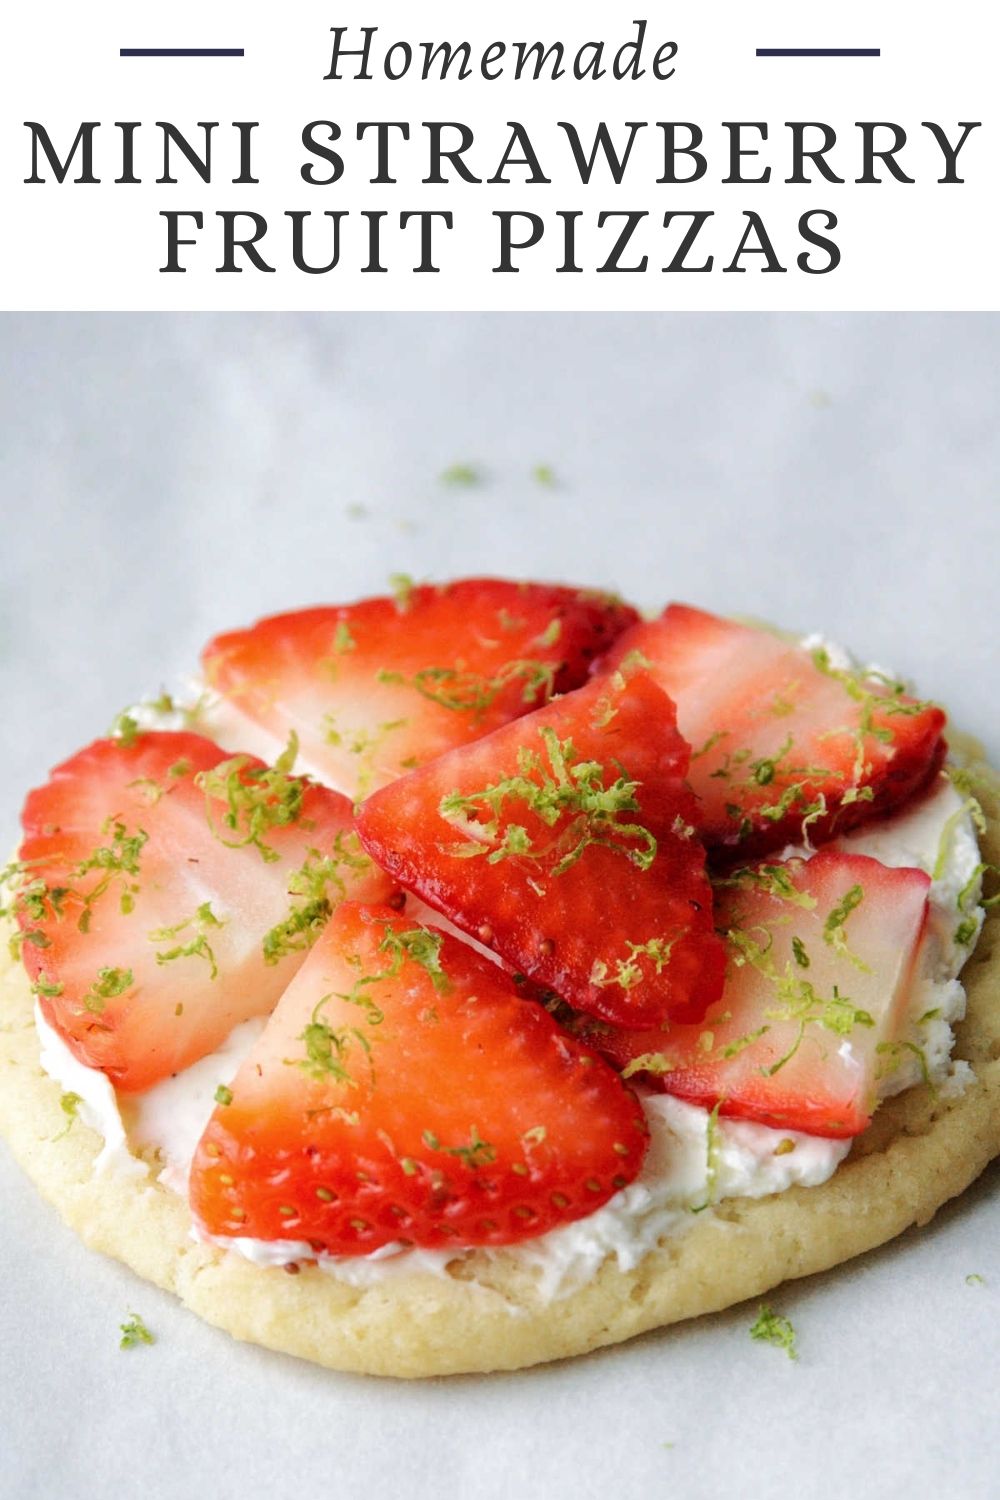 Mini strawberry fruit pizzas are built on chewy homemade sugar cookies. Top them with a slightly sweet cream cheese spread, fresh berries and an optional pop of lime zest for a super tasty treat.